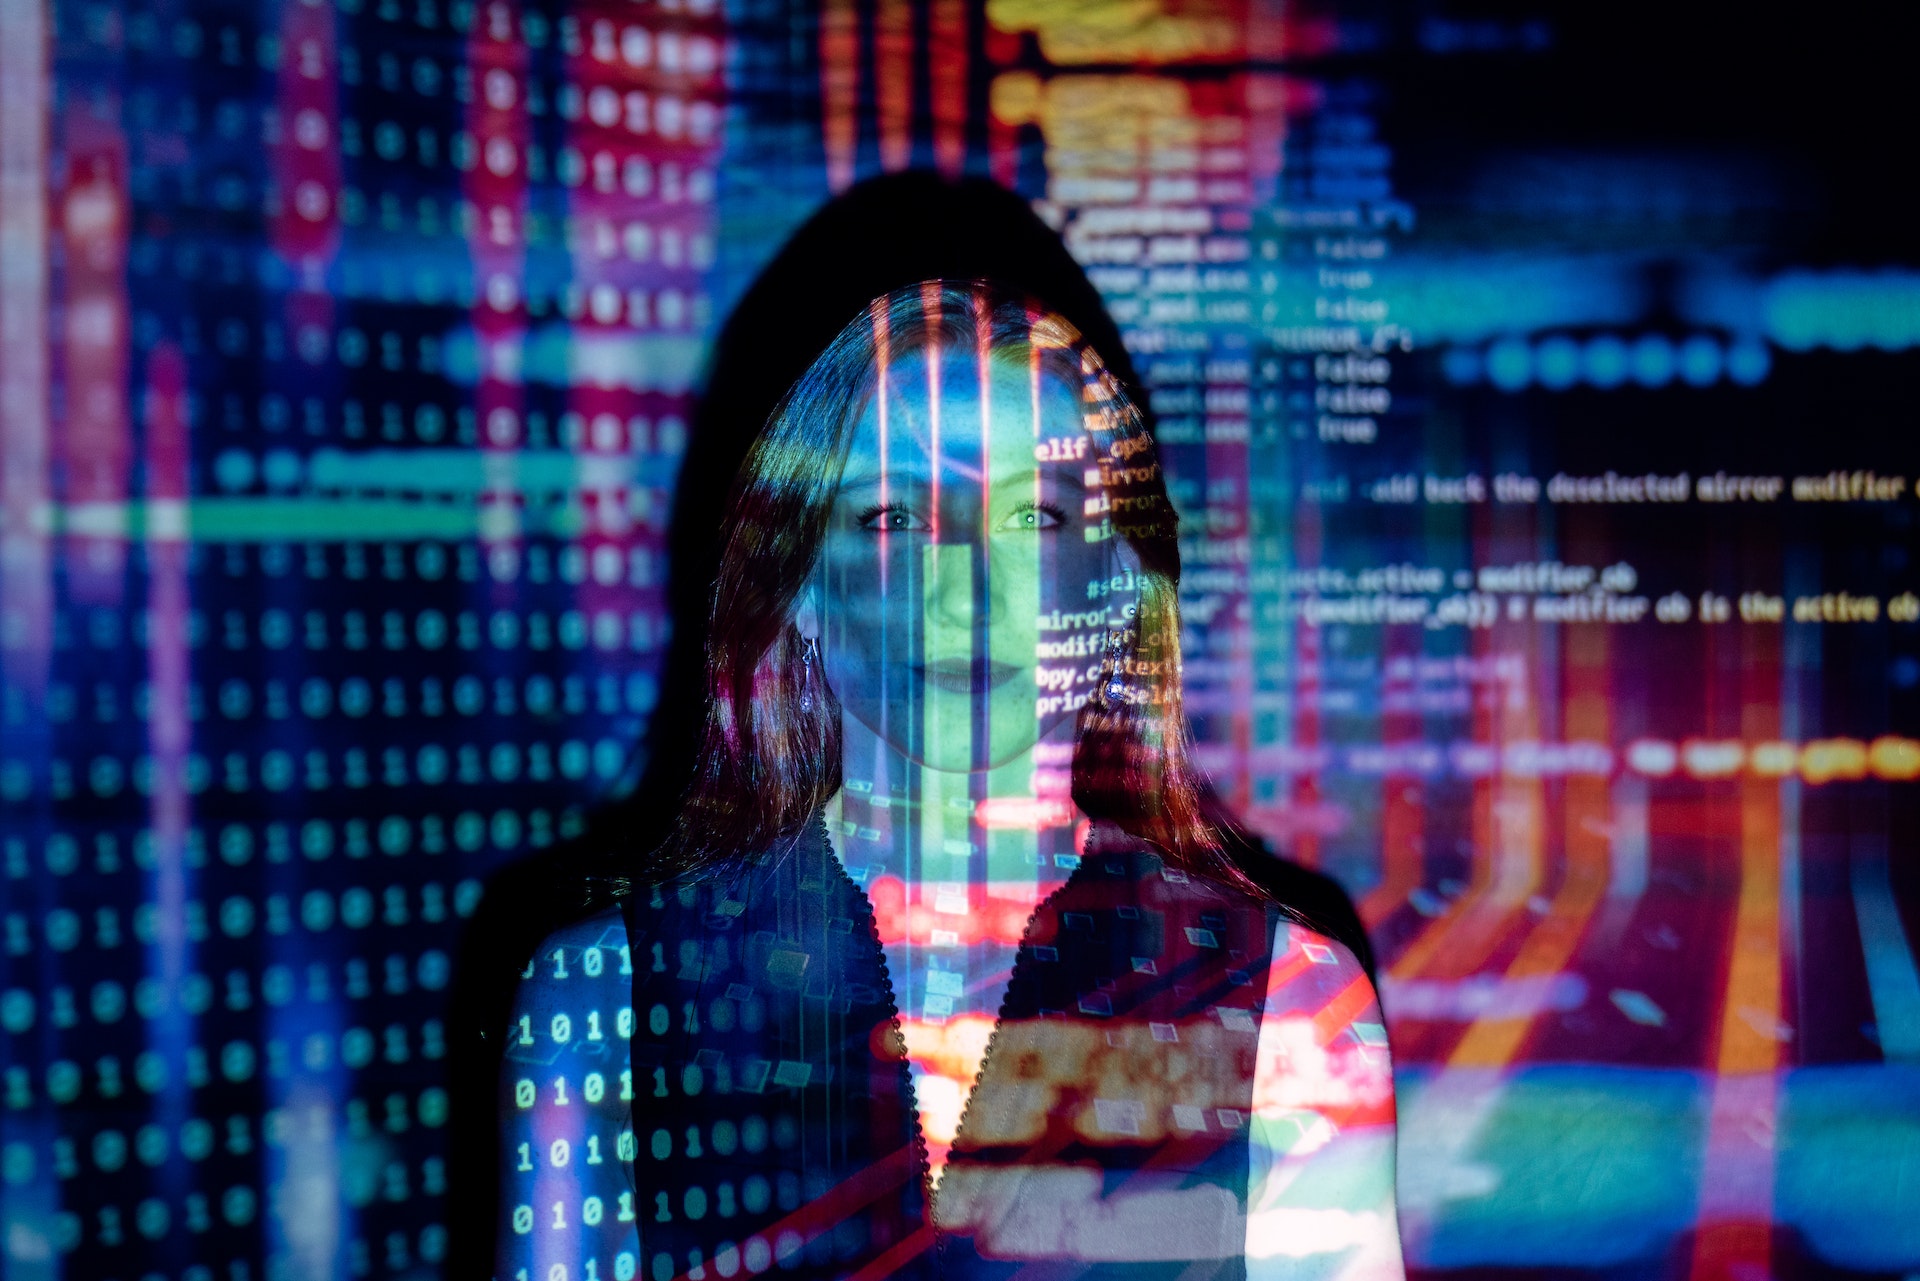 Code enhanced by AI projected onto a woman